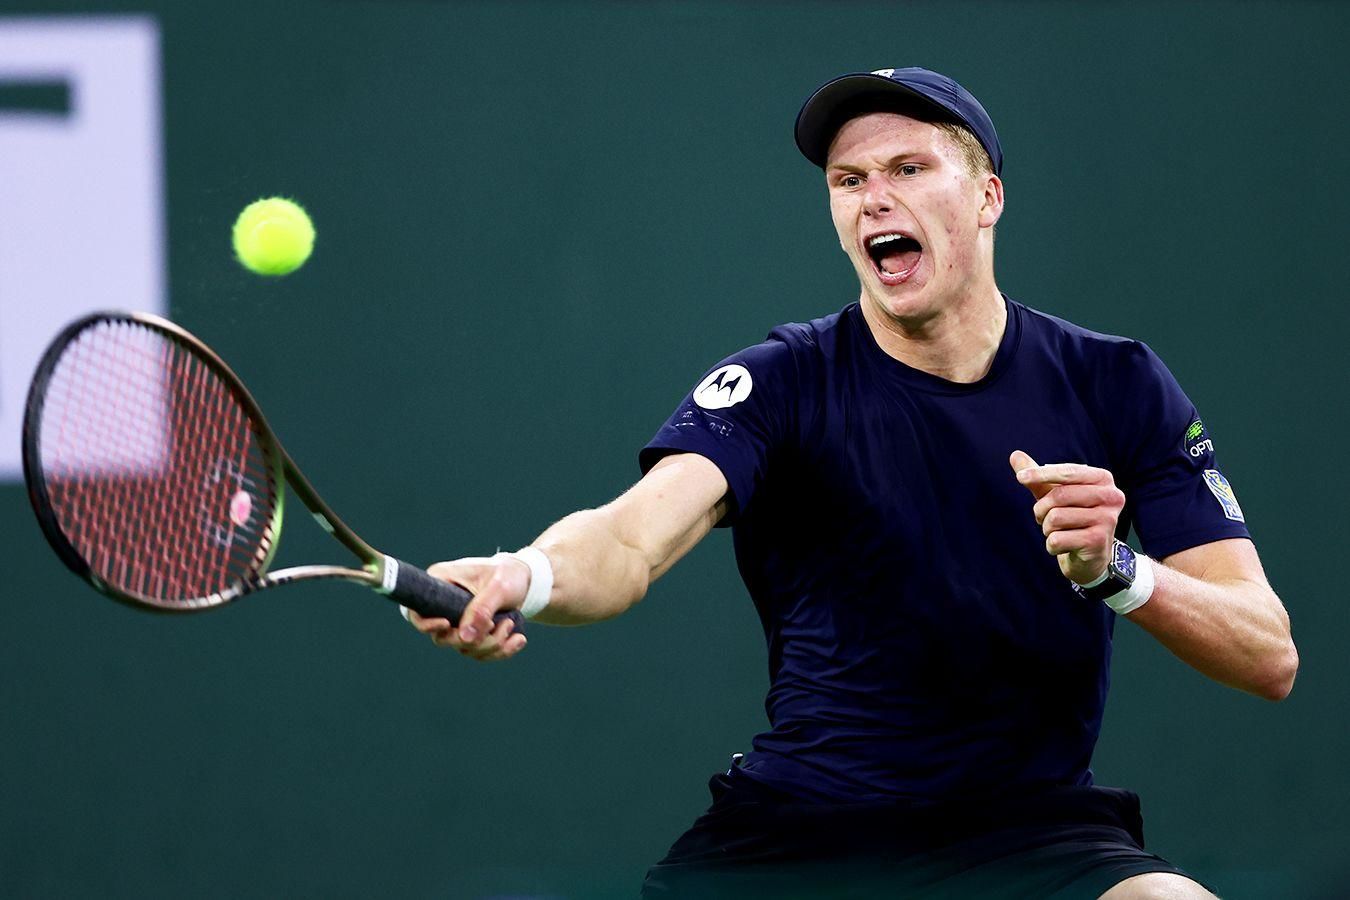 Jenson Brooksby vs Cameron Norrie Prediction, Betting Tips & Odds │13 JANUARY, 2023